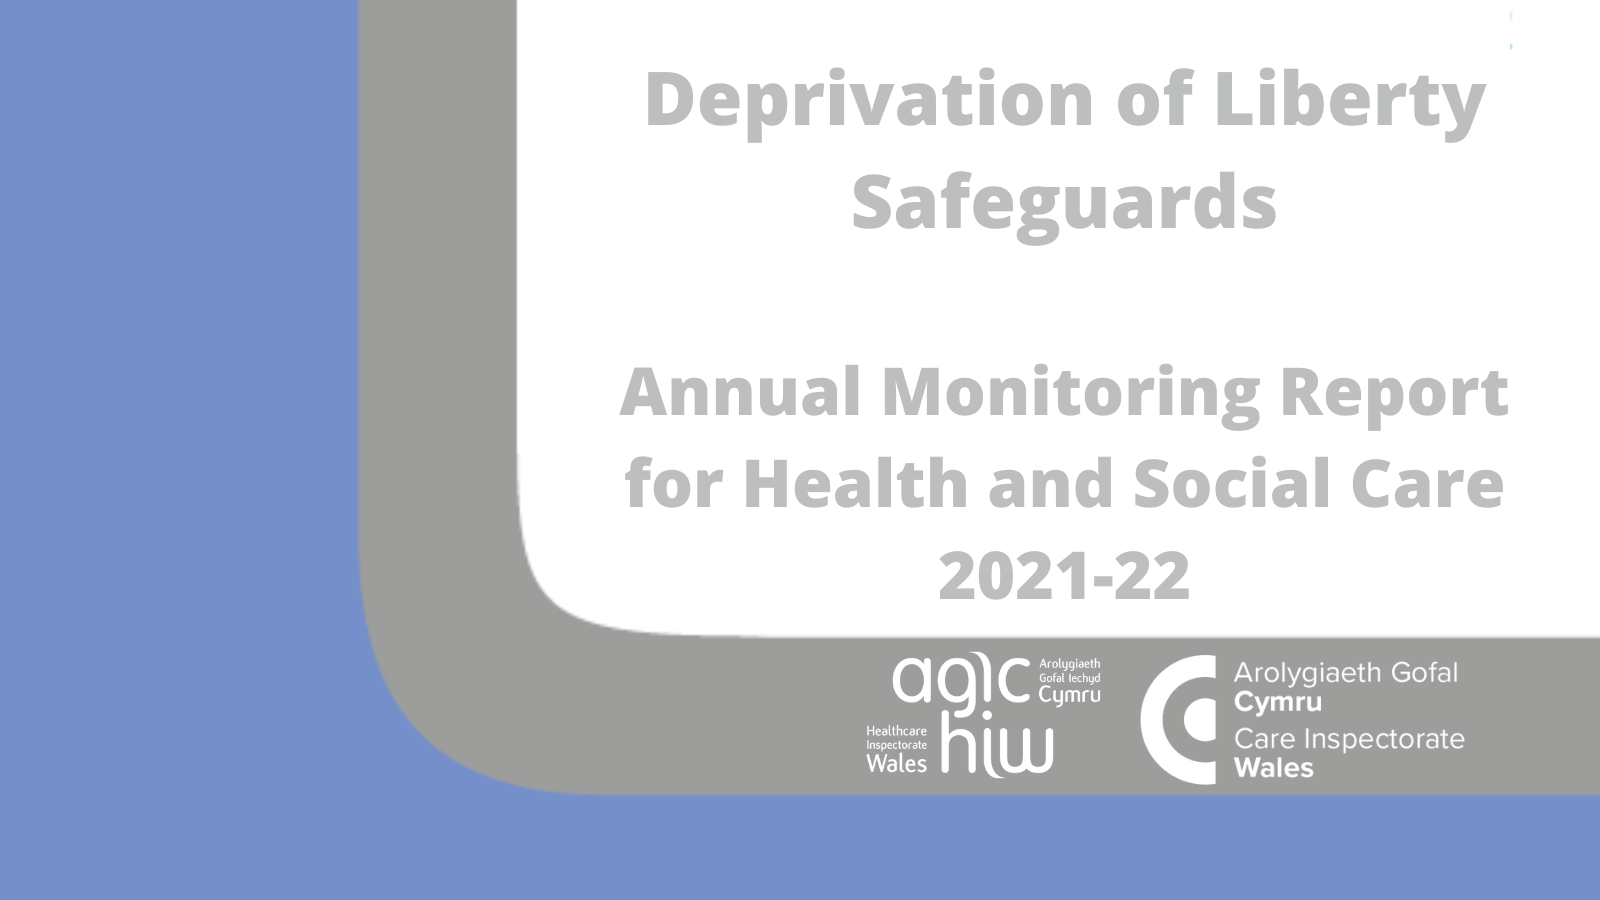 Deprivation of Liberty Safeguards - Annual Monitoring Report for Health and Social Care 2021-2022